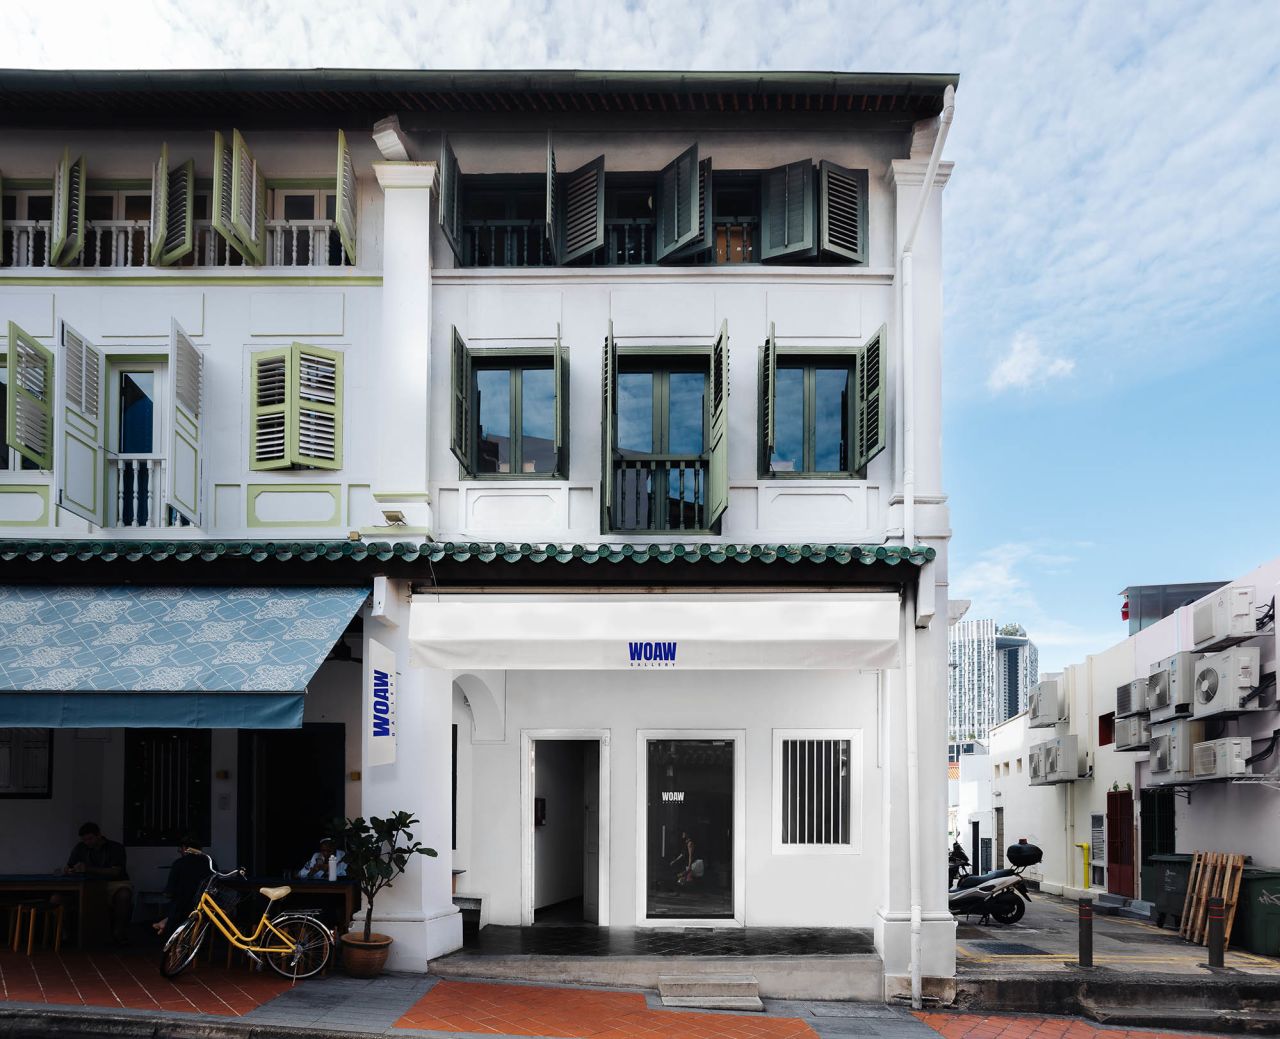 Hong Kong-based Woaw Gallery opened a new outpost in Singapore last year.